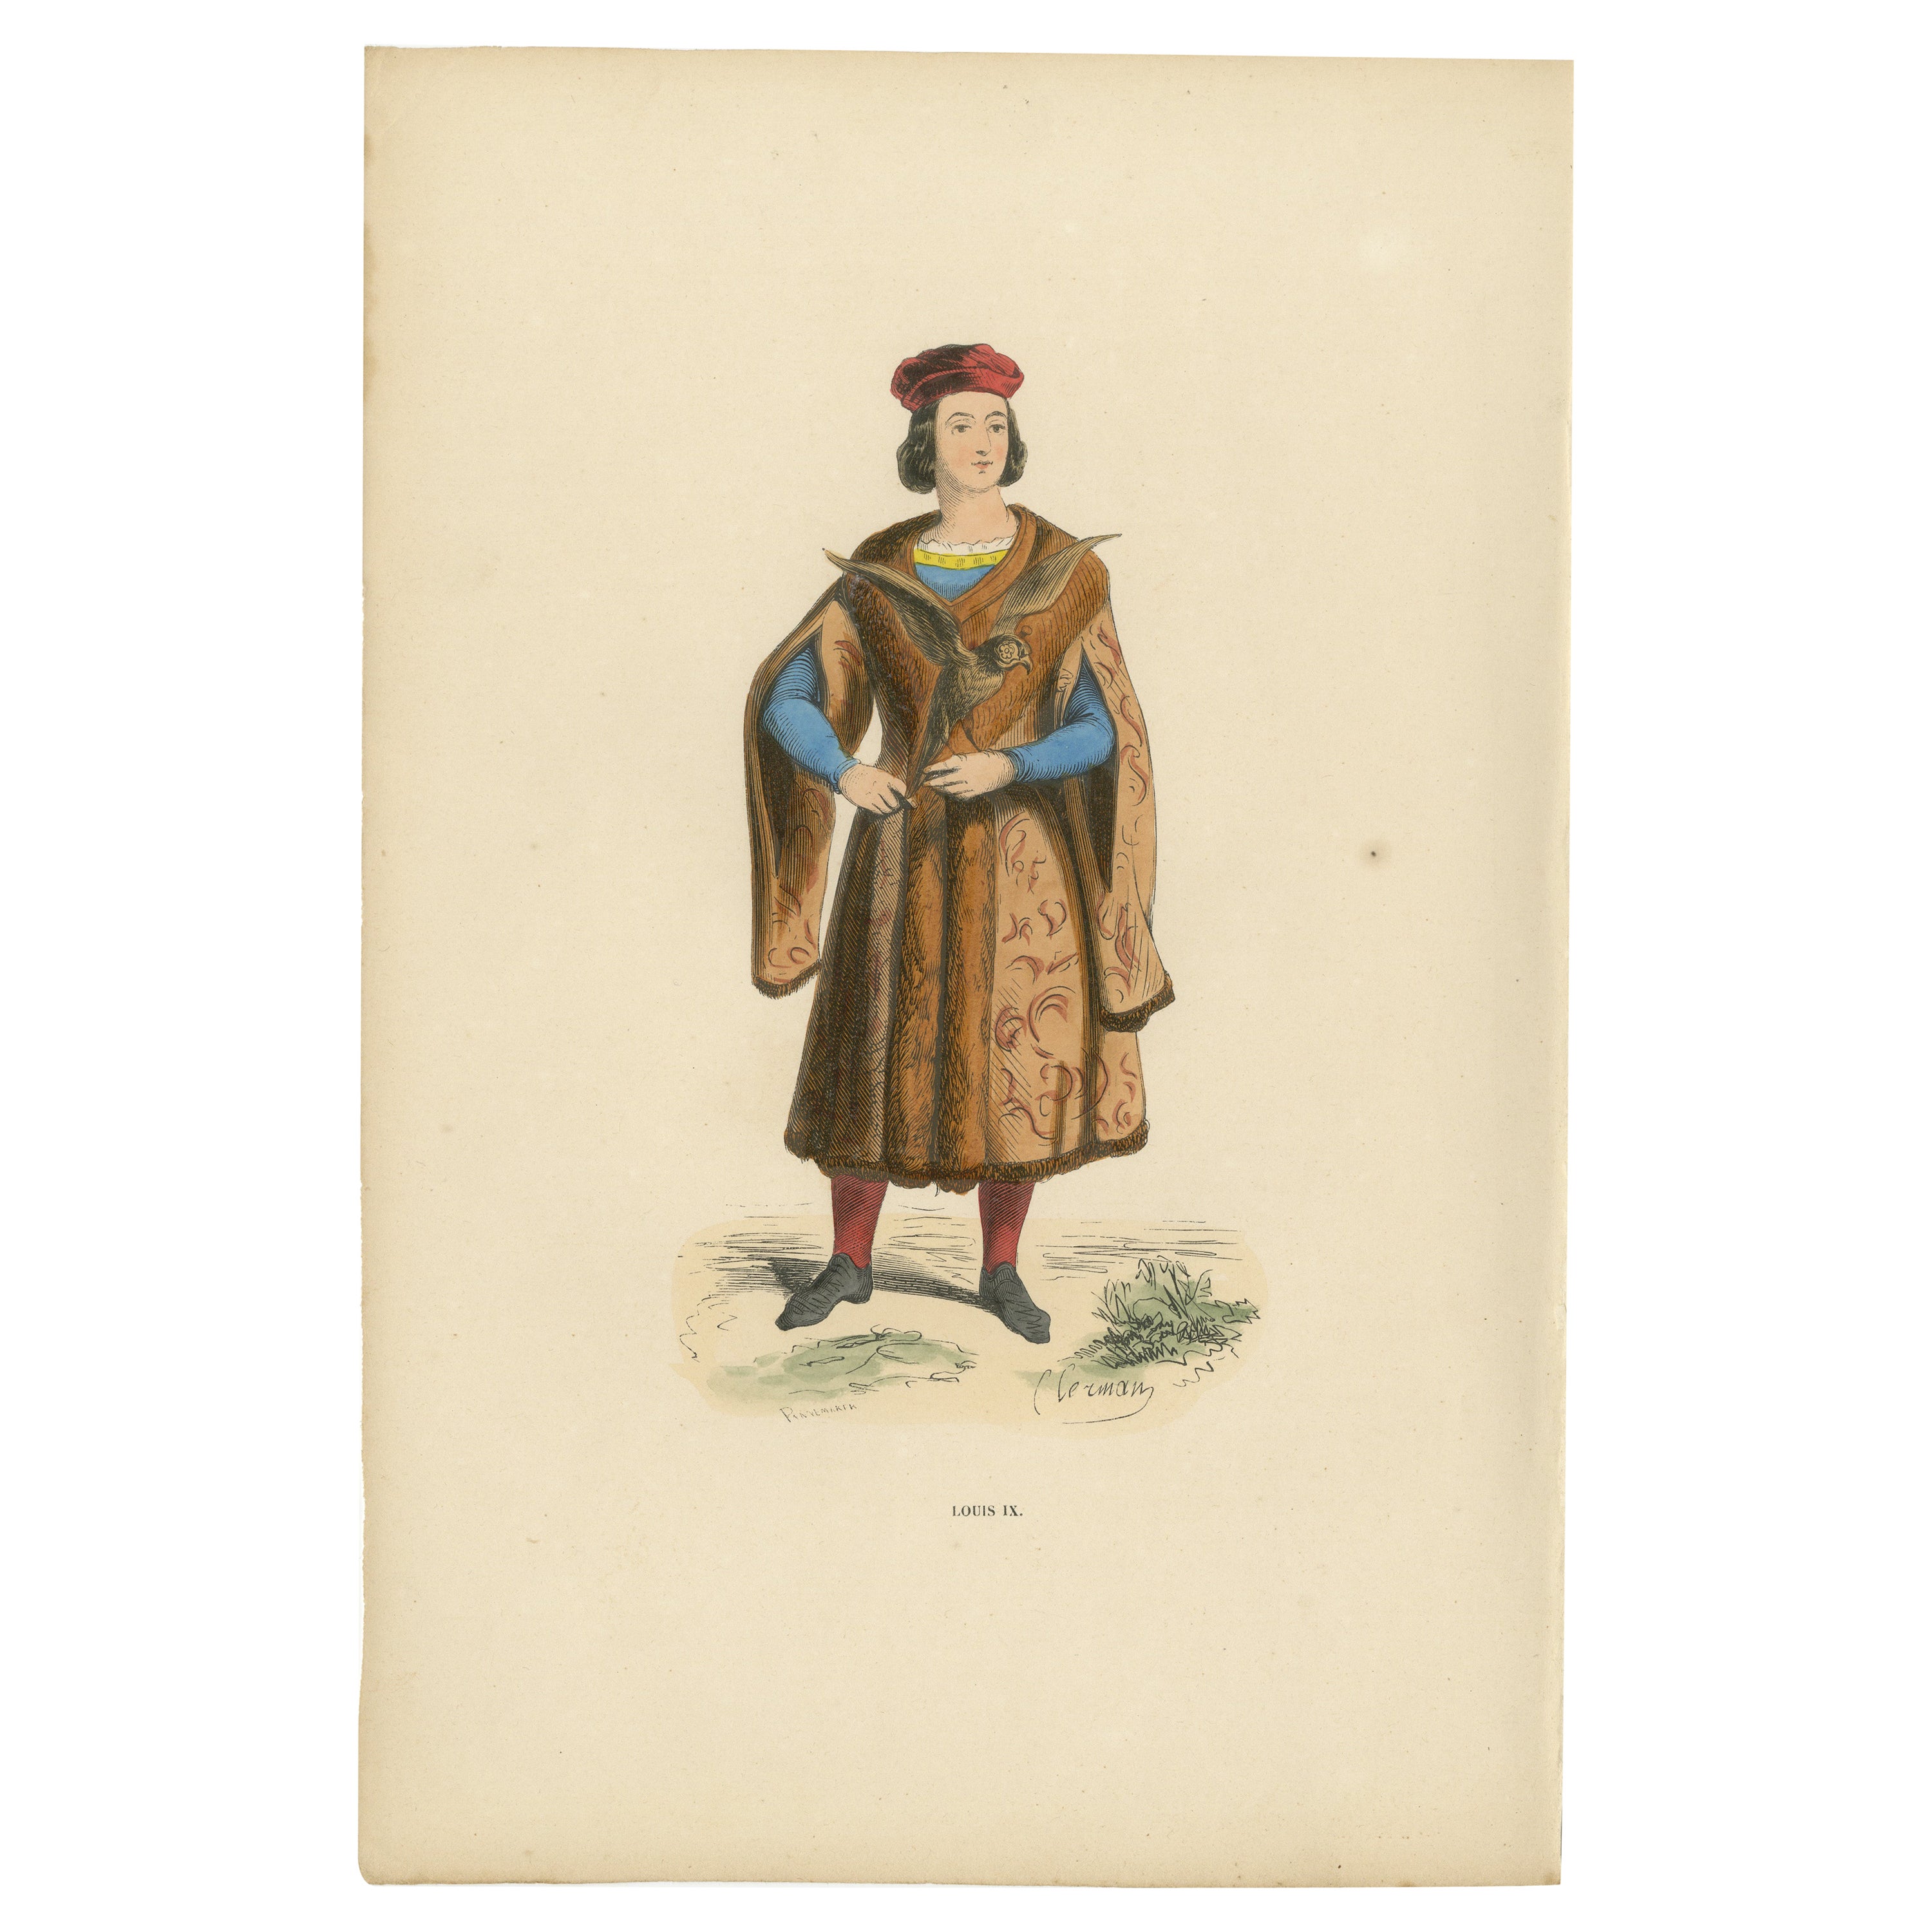 Louis IX: A Portrayal of French Royalty in Medieval Attire, Published in 1847